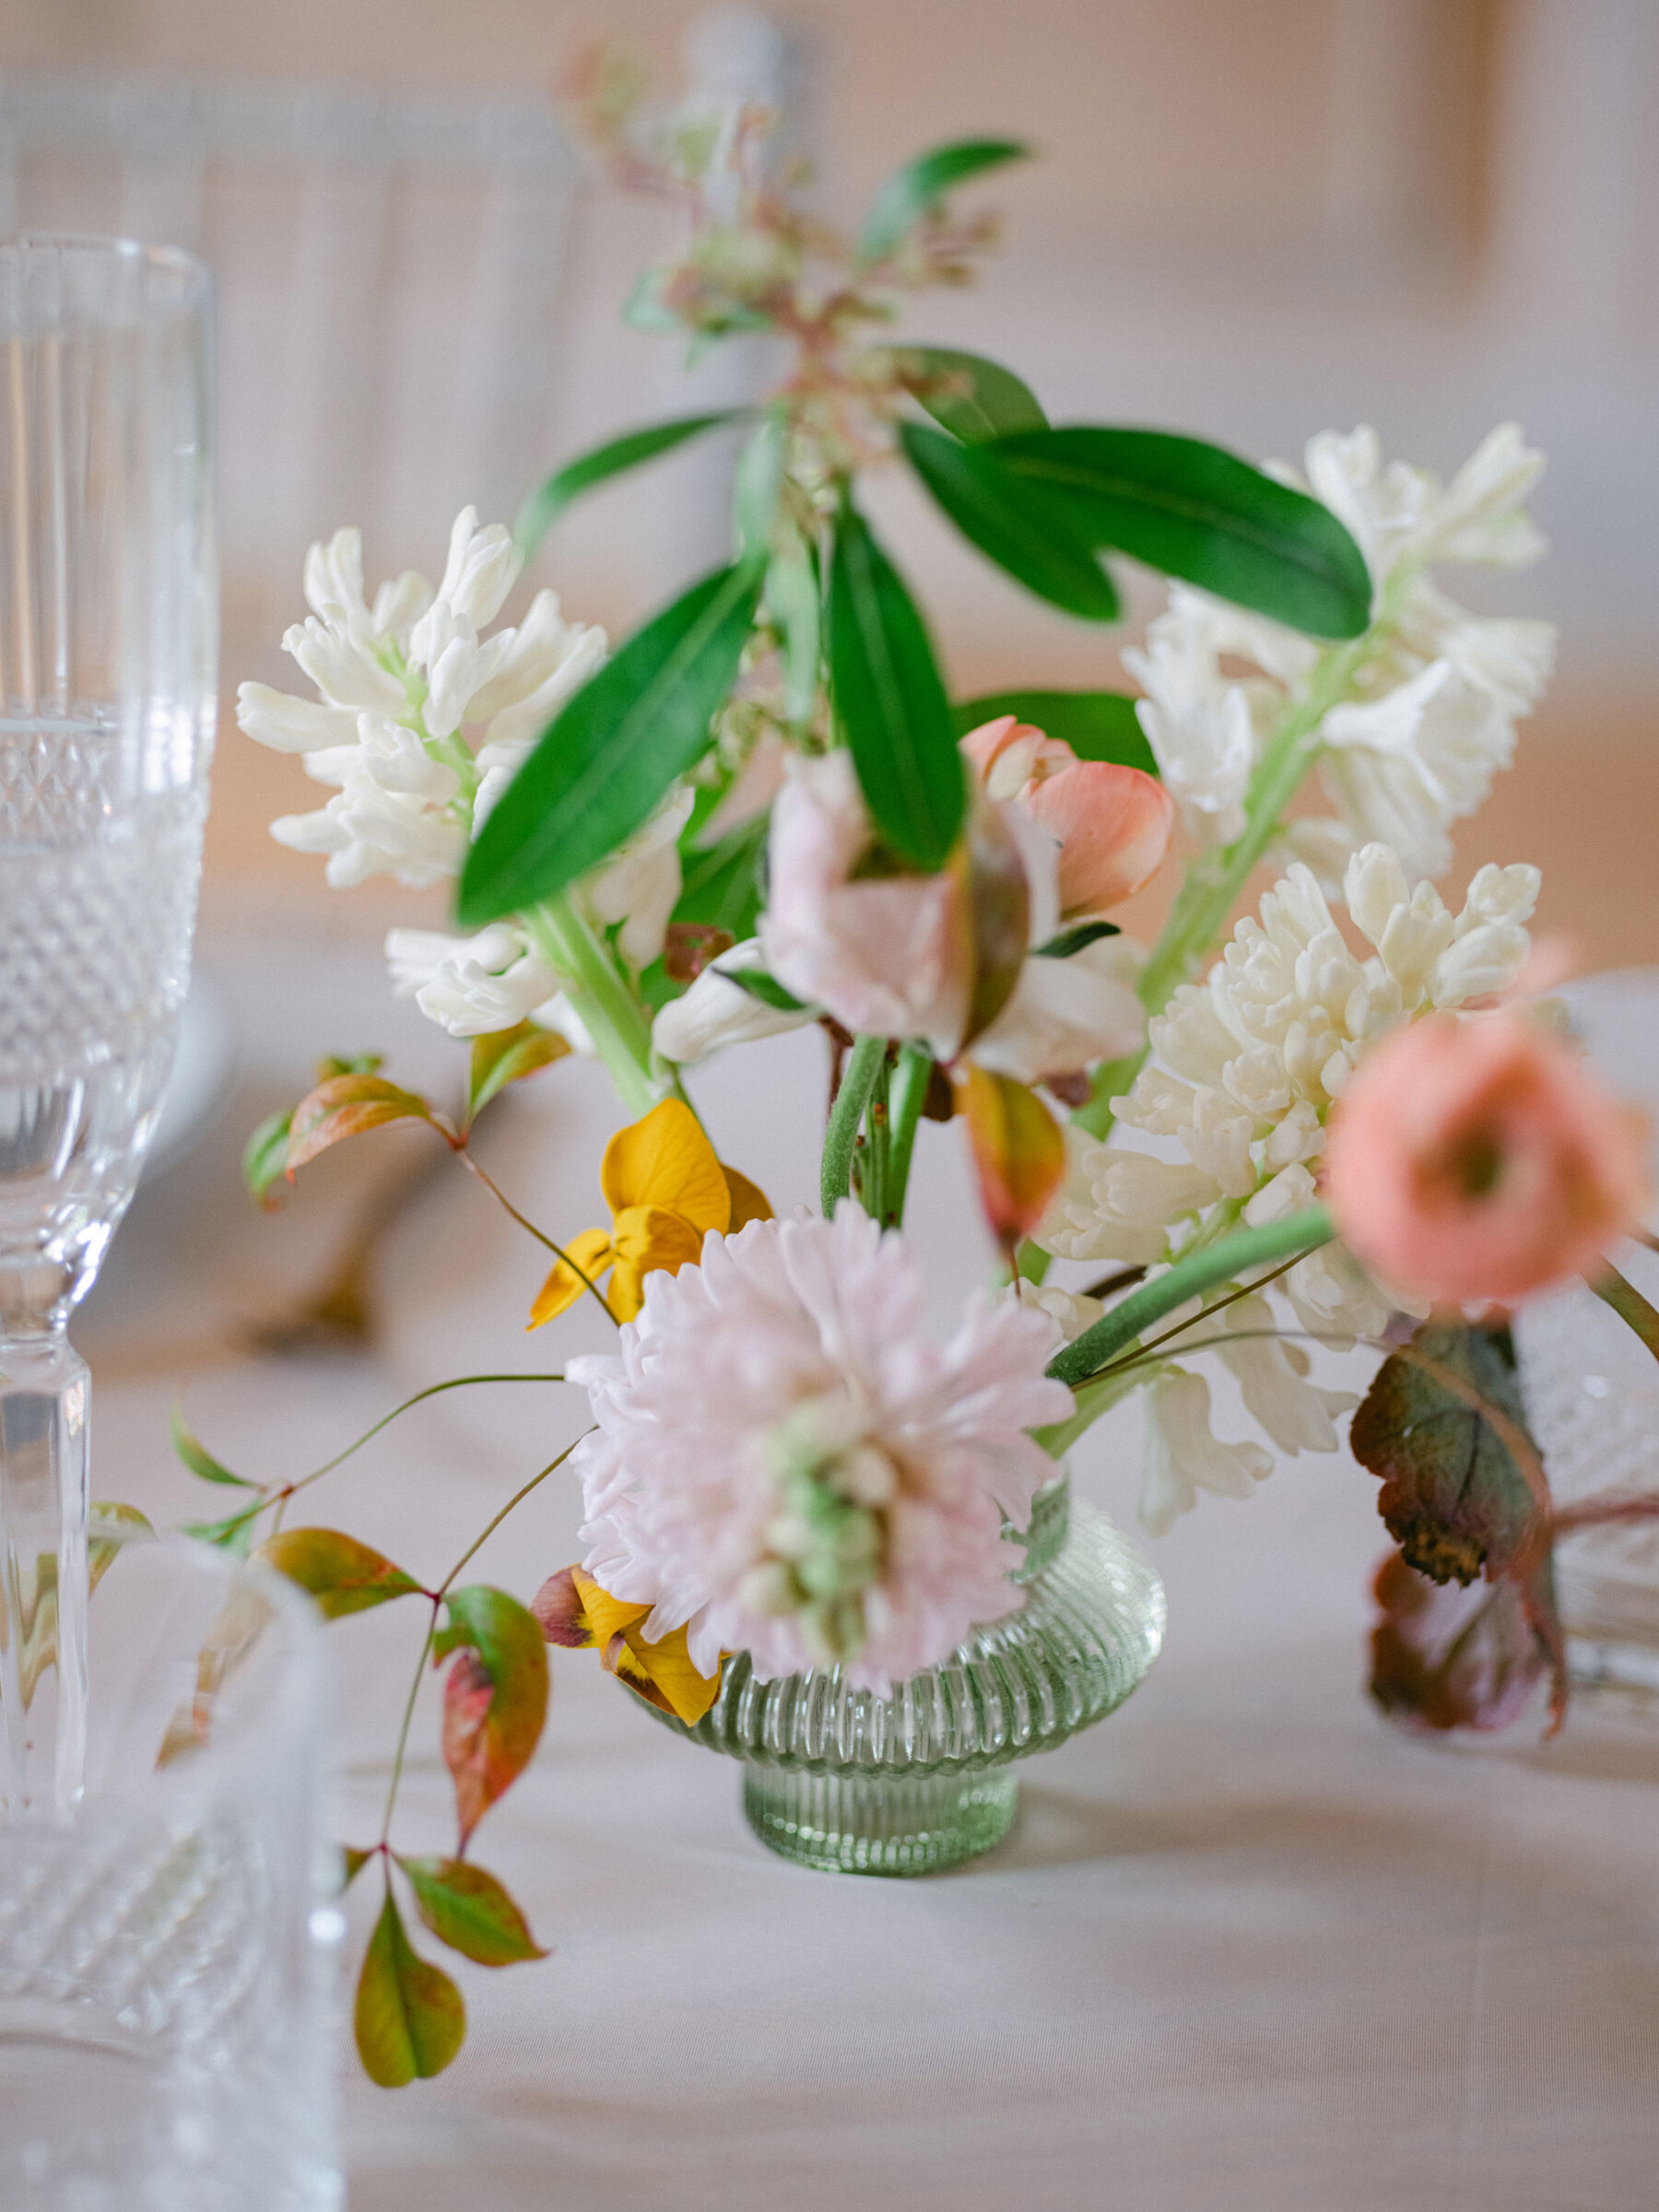 Elegant small ribbed glass vase with a floral frog inside supporting beautiful British grown wedding flowers.